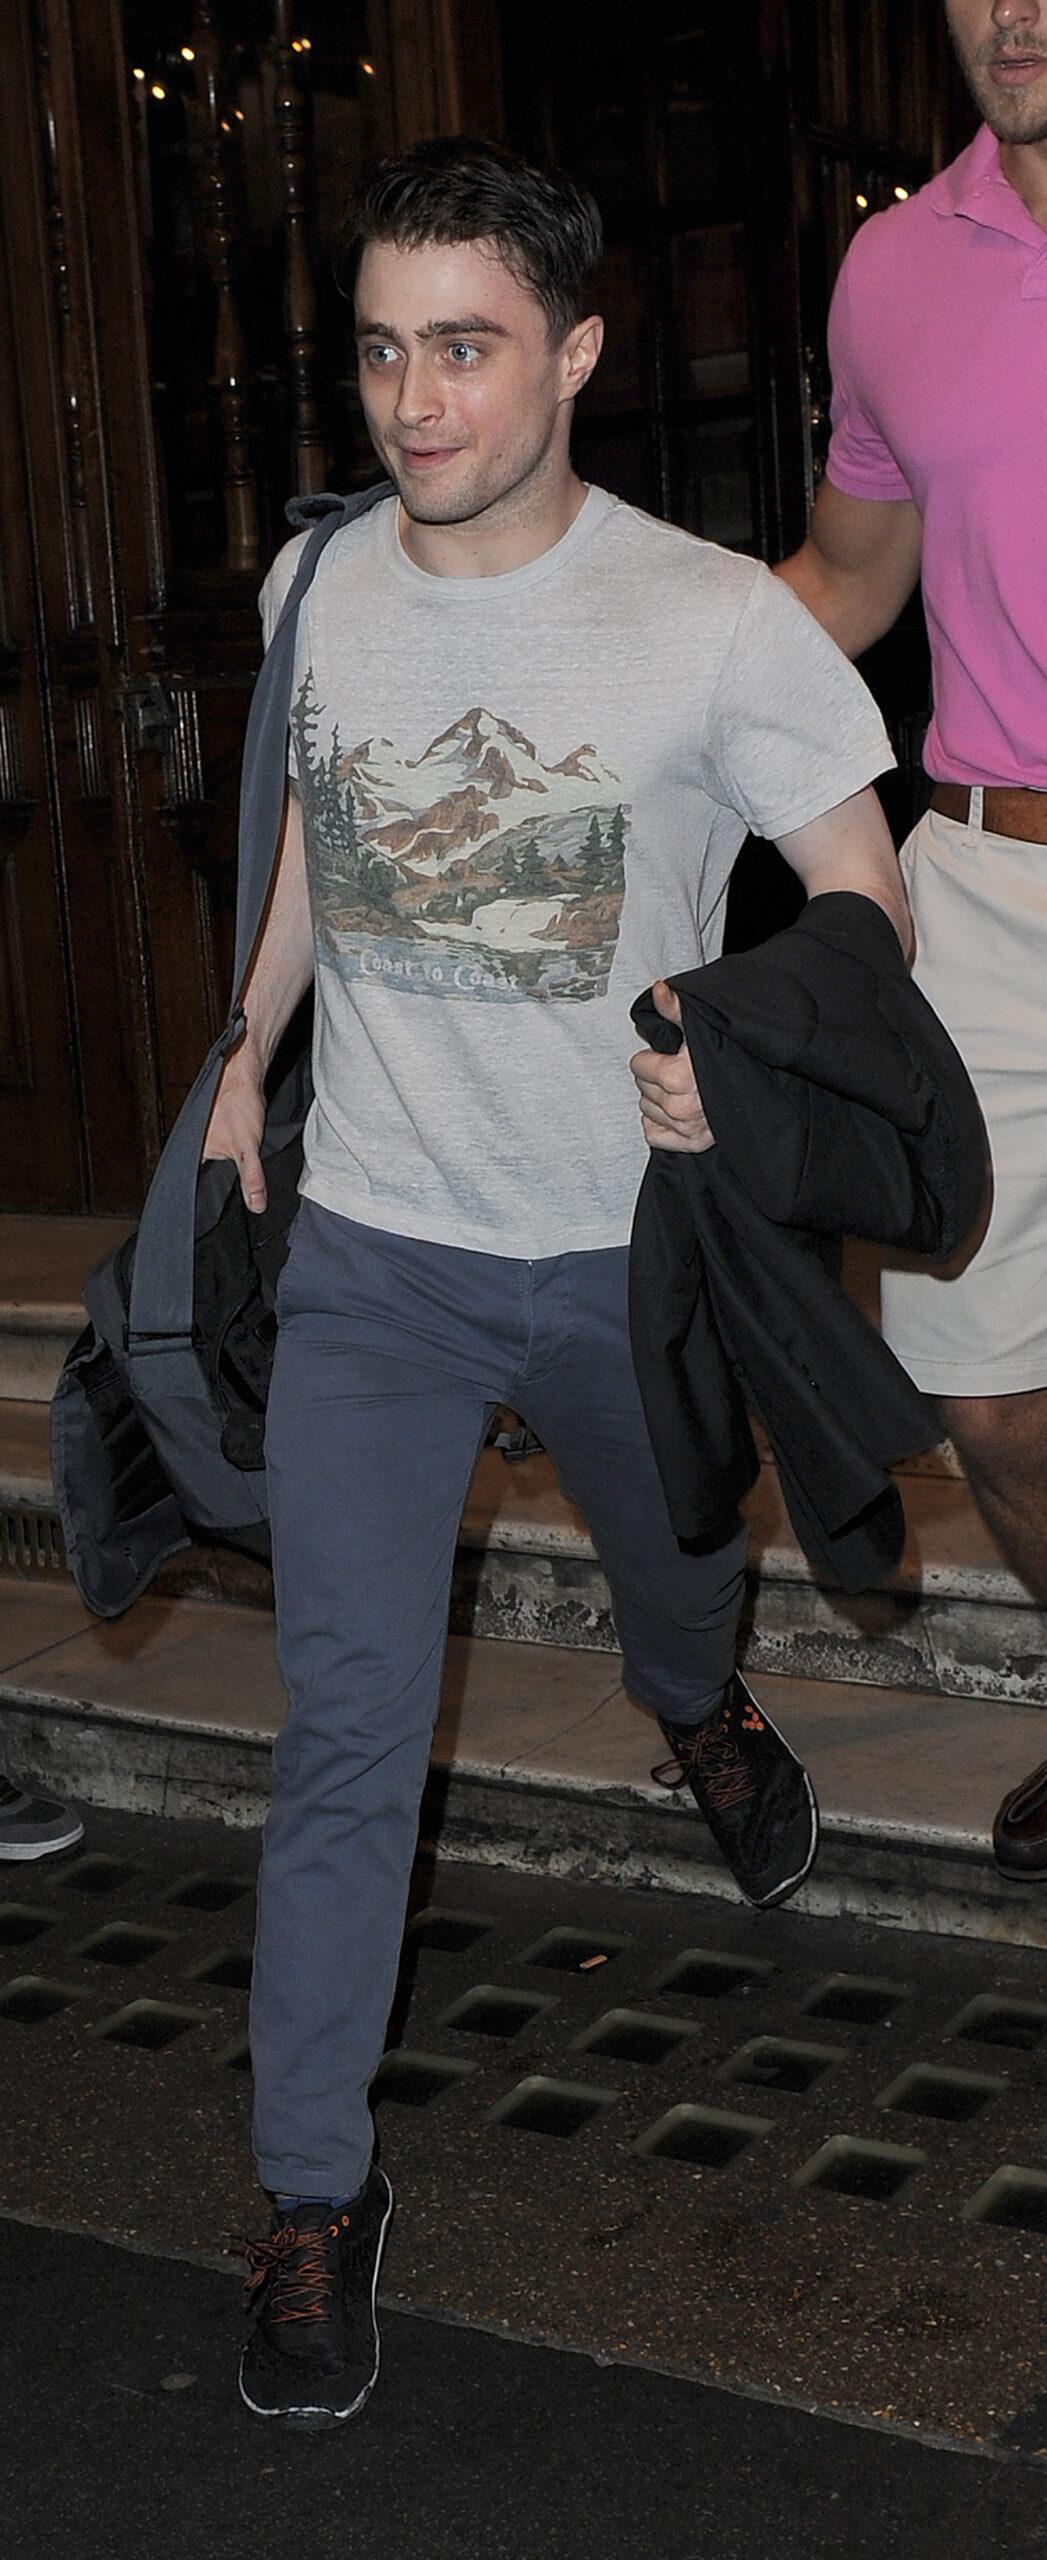 Daniel Radcliffe leaves the Noel Coward Theatre having performed in apos The Cripple Of Inishmaan apos The Harry Potter star was wearing blue trousers a grey t-shirt and black trainers He appeared rather wide eyed and sweaty